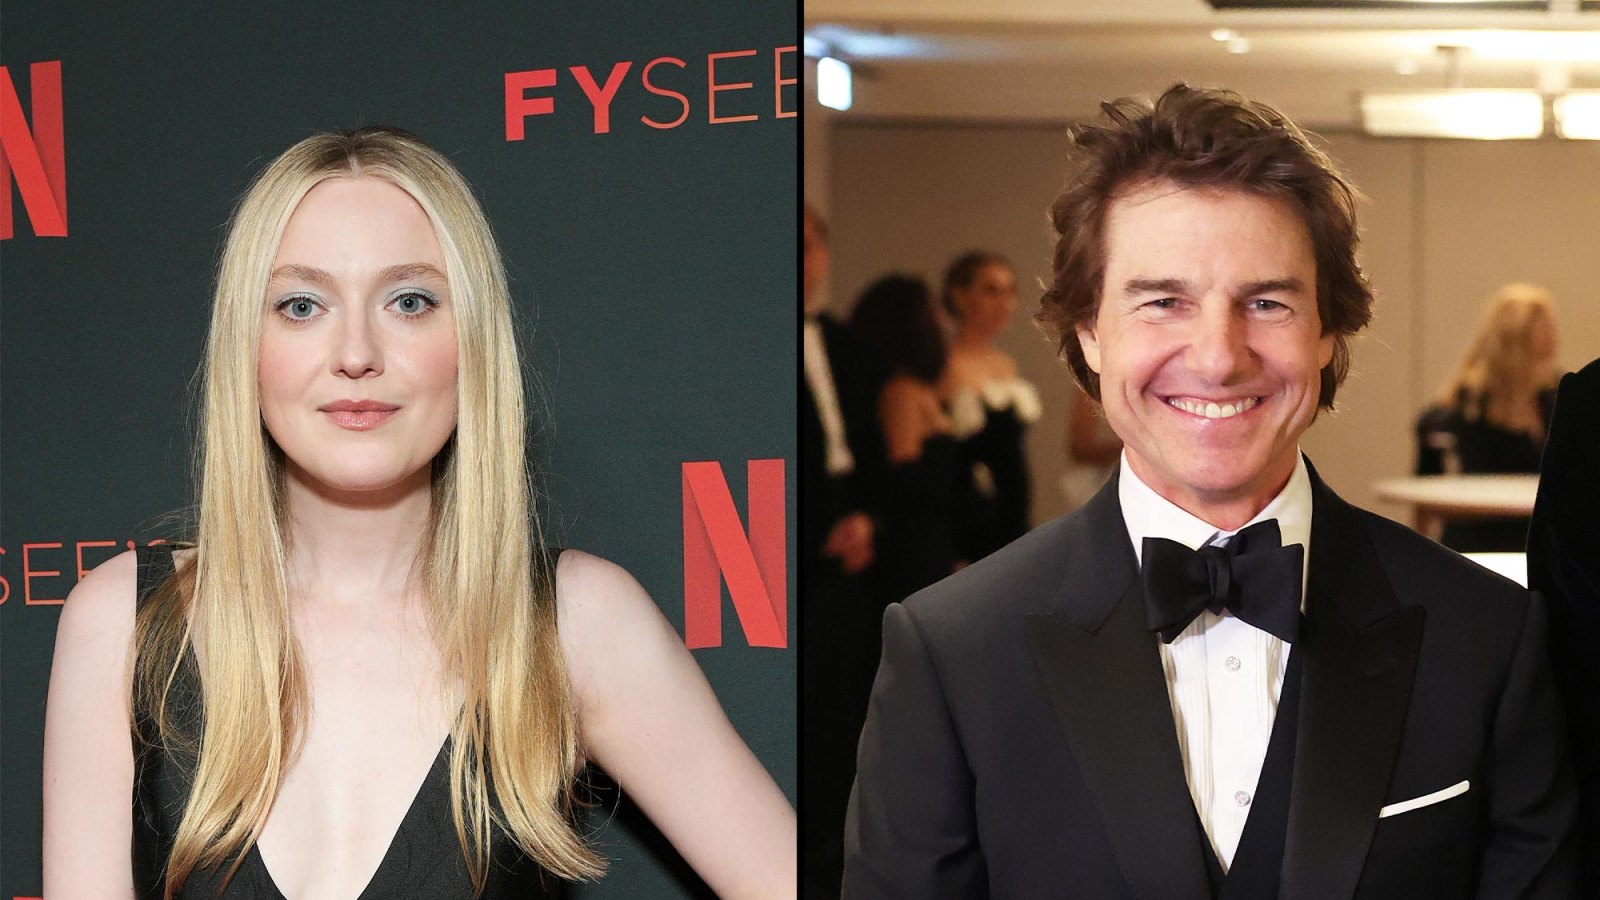 Dakota Fanning Says Tom Cruise Sends a Pair of Shoes for Her Birthday Every Year Since War of the Worlds